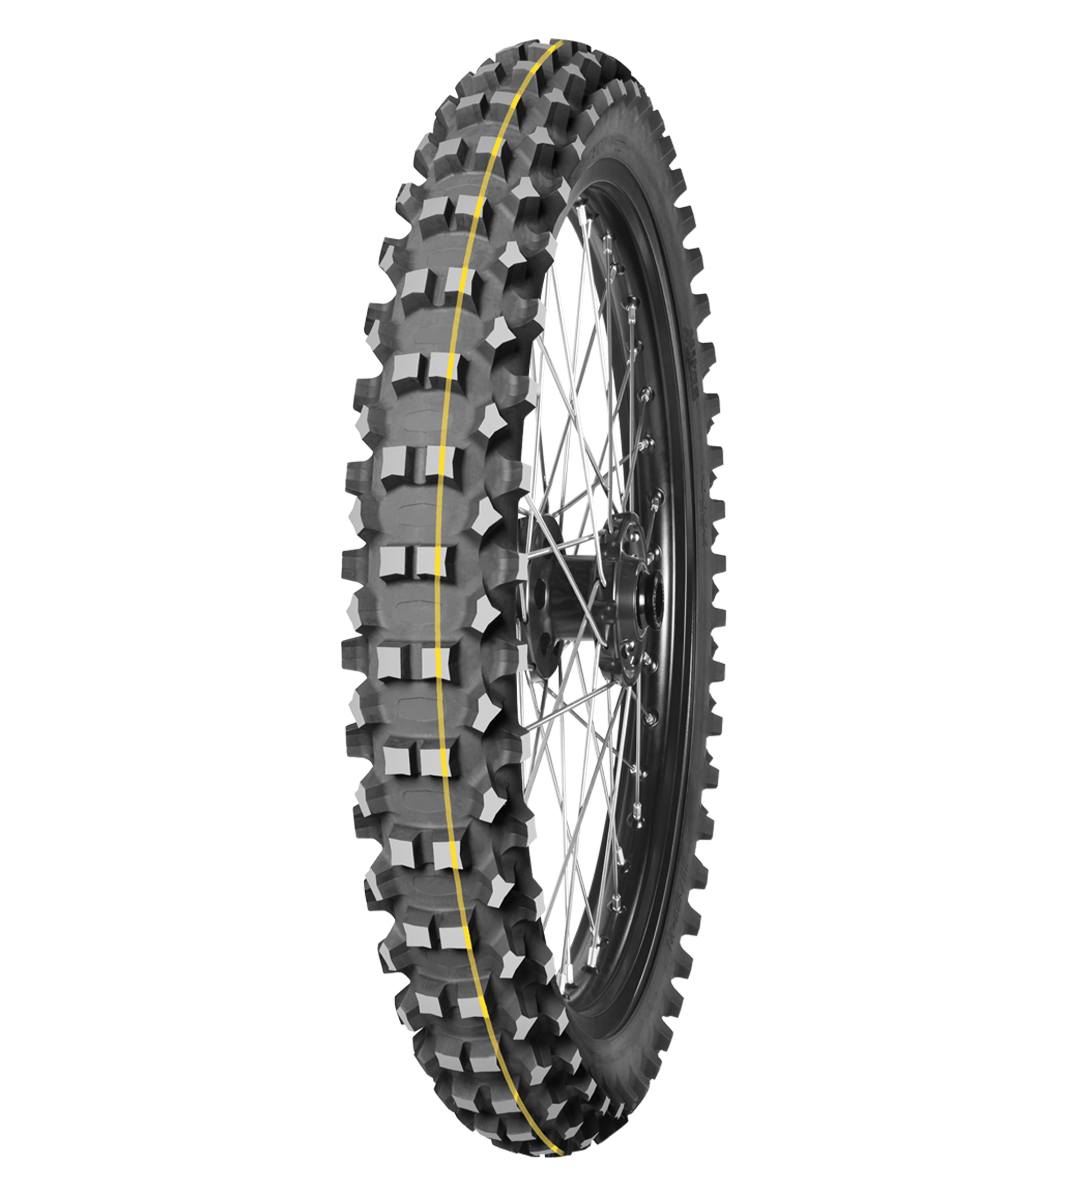 Mitas TERRA FORCE-MX MH 90/100-21 Enduro Competition Off-Road SUPER 57M Yellow Tube Front Tire, 226659, 90/100-21, Enduro Competition, Front, Off-Road, Terra Force, Terra Force-MX MH, Trail, Tires - Imported and distributed in North & South America by Lindeco Genuine Powersports - Premier Powersports Equipment and Accessories for Motorcycle Enthusiasts, Professional Riders and Dealers.